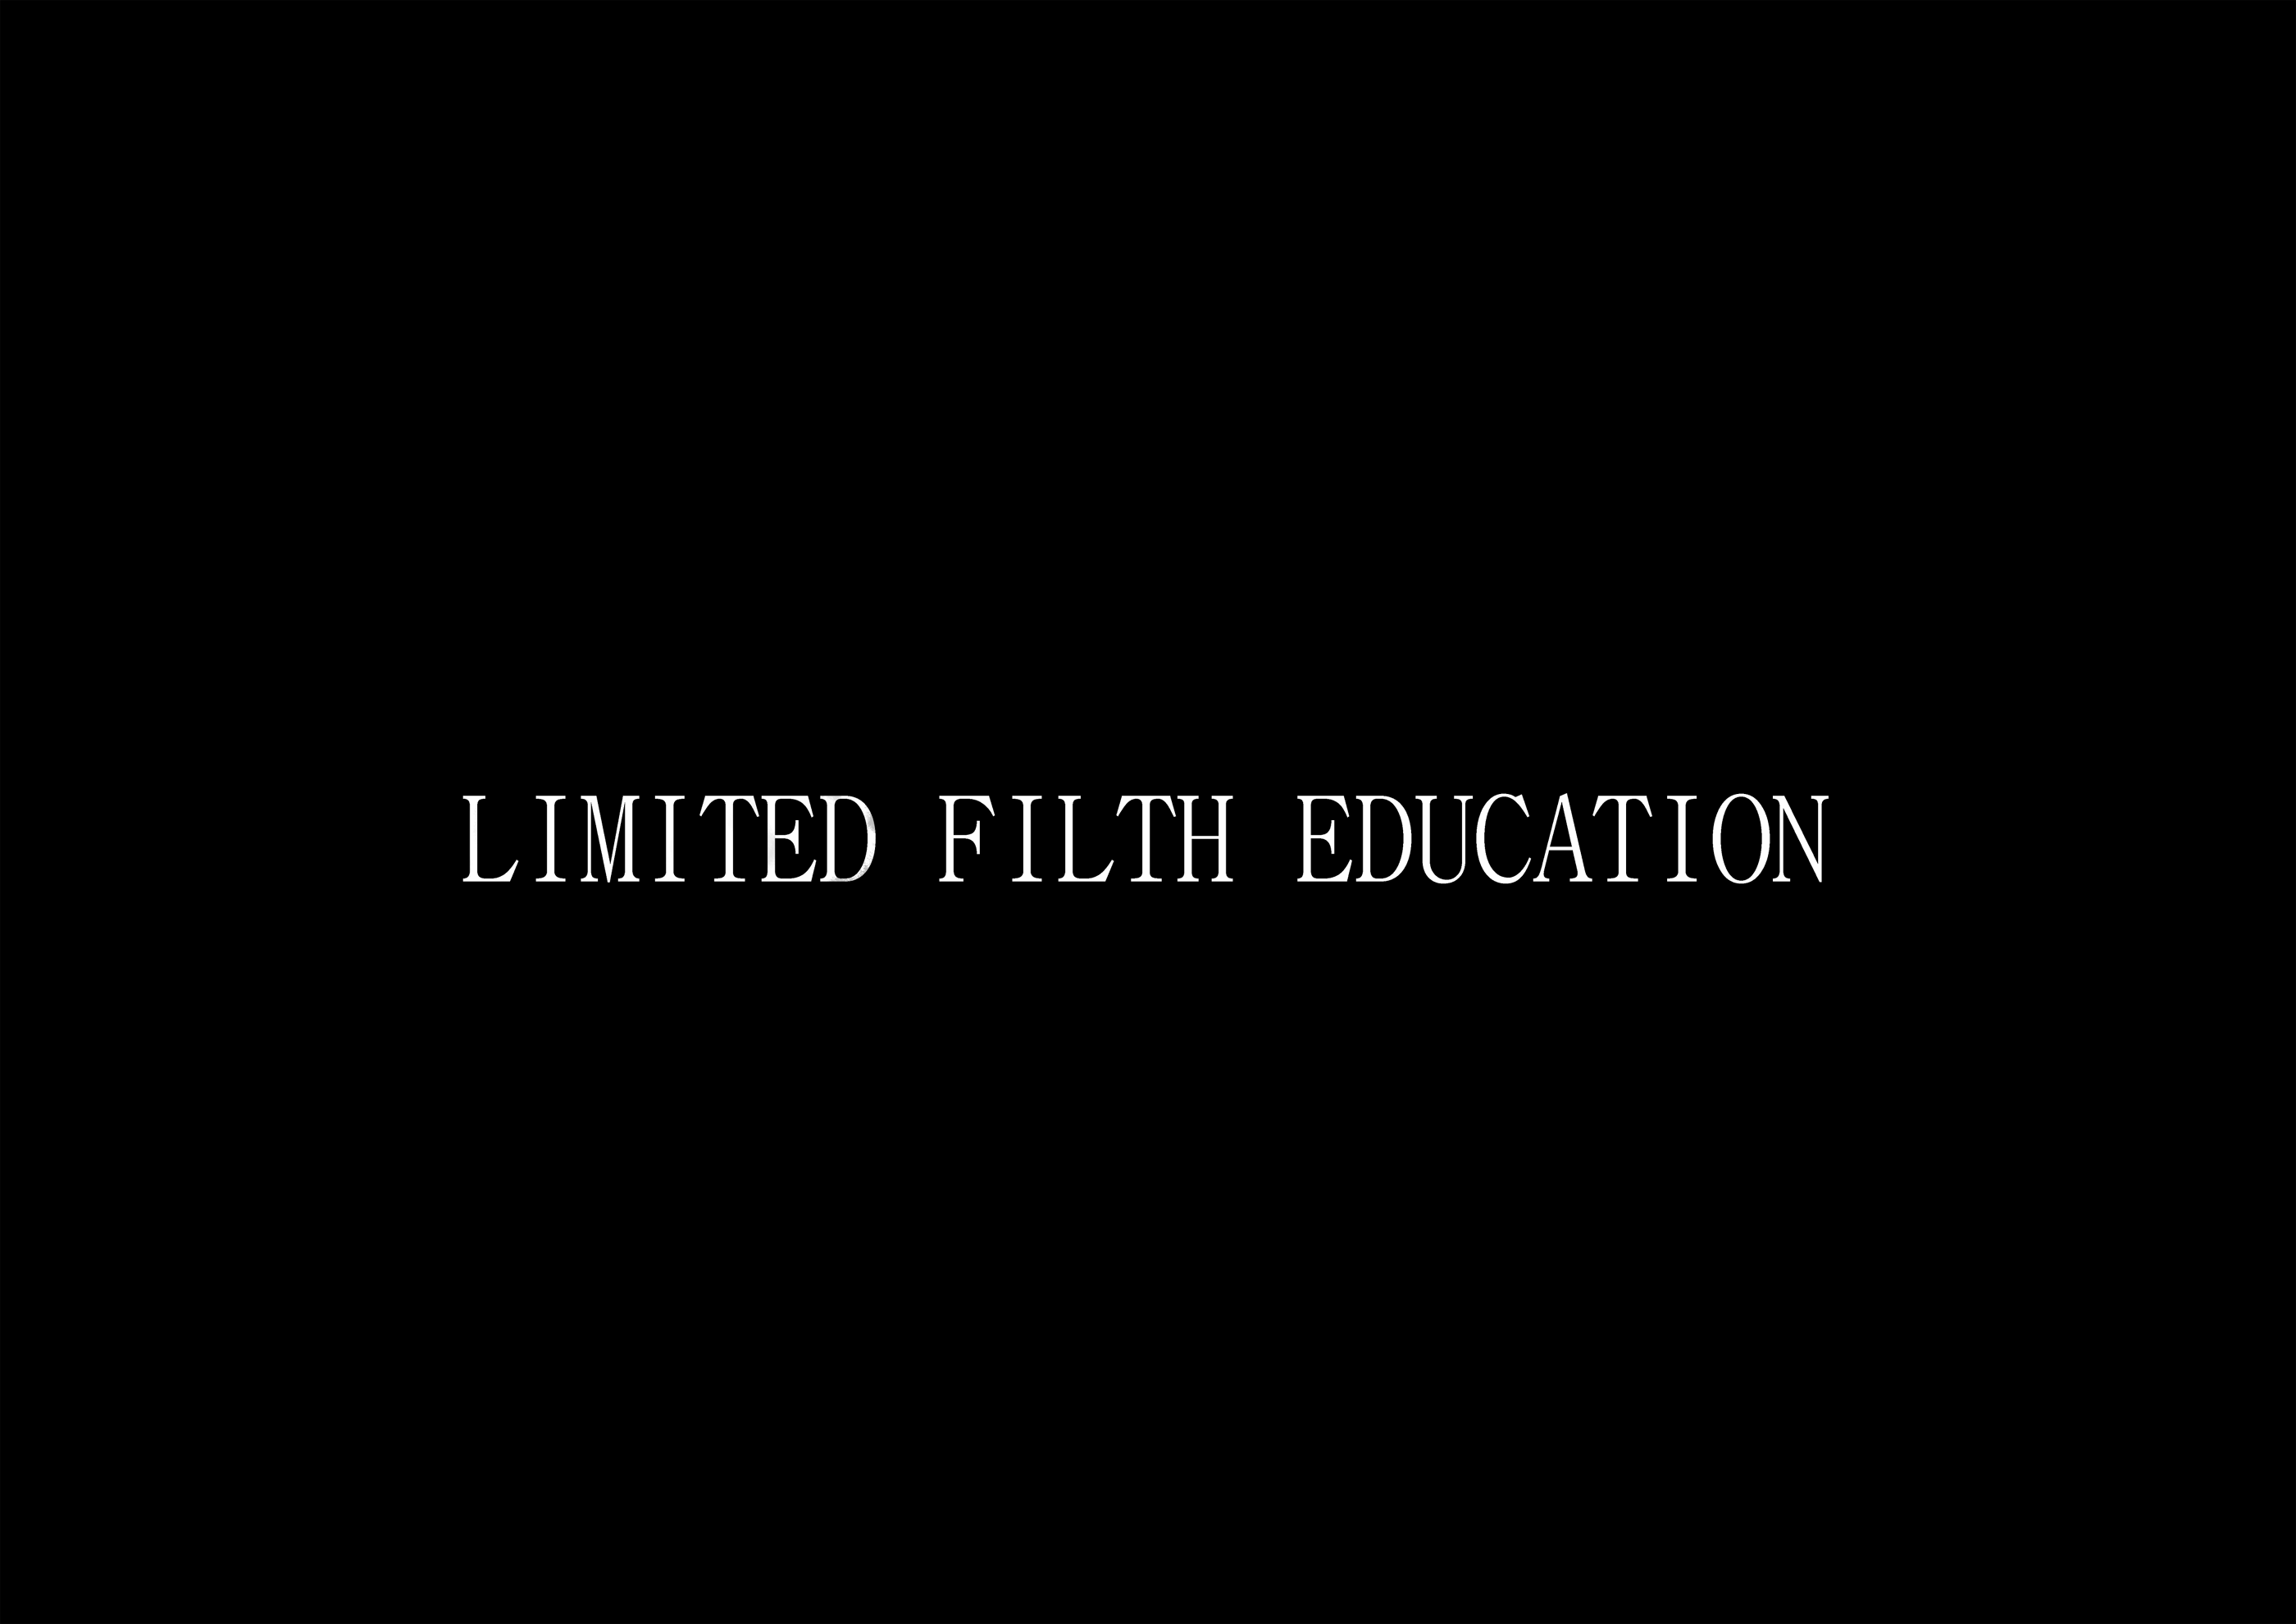 filtheducation